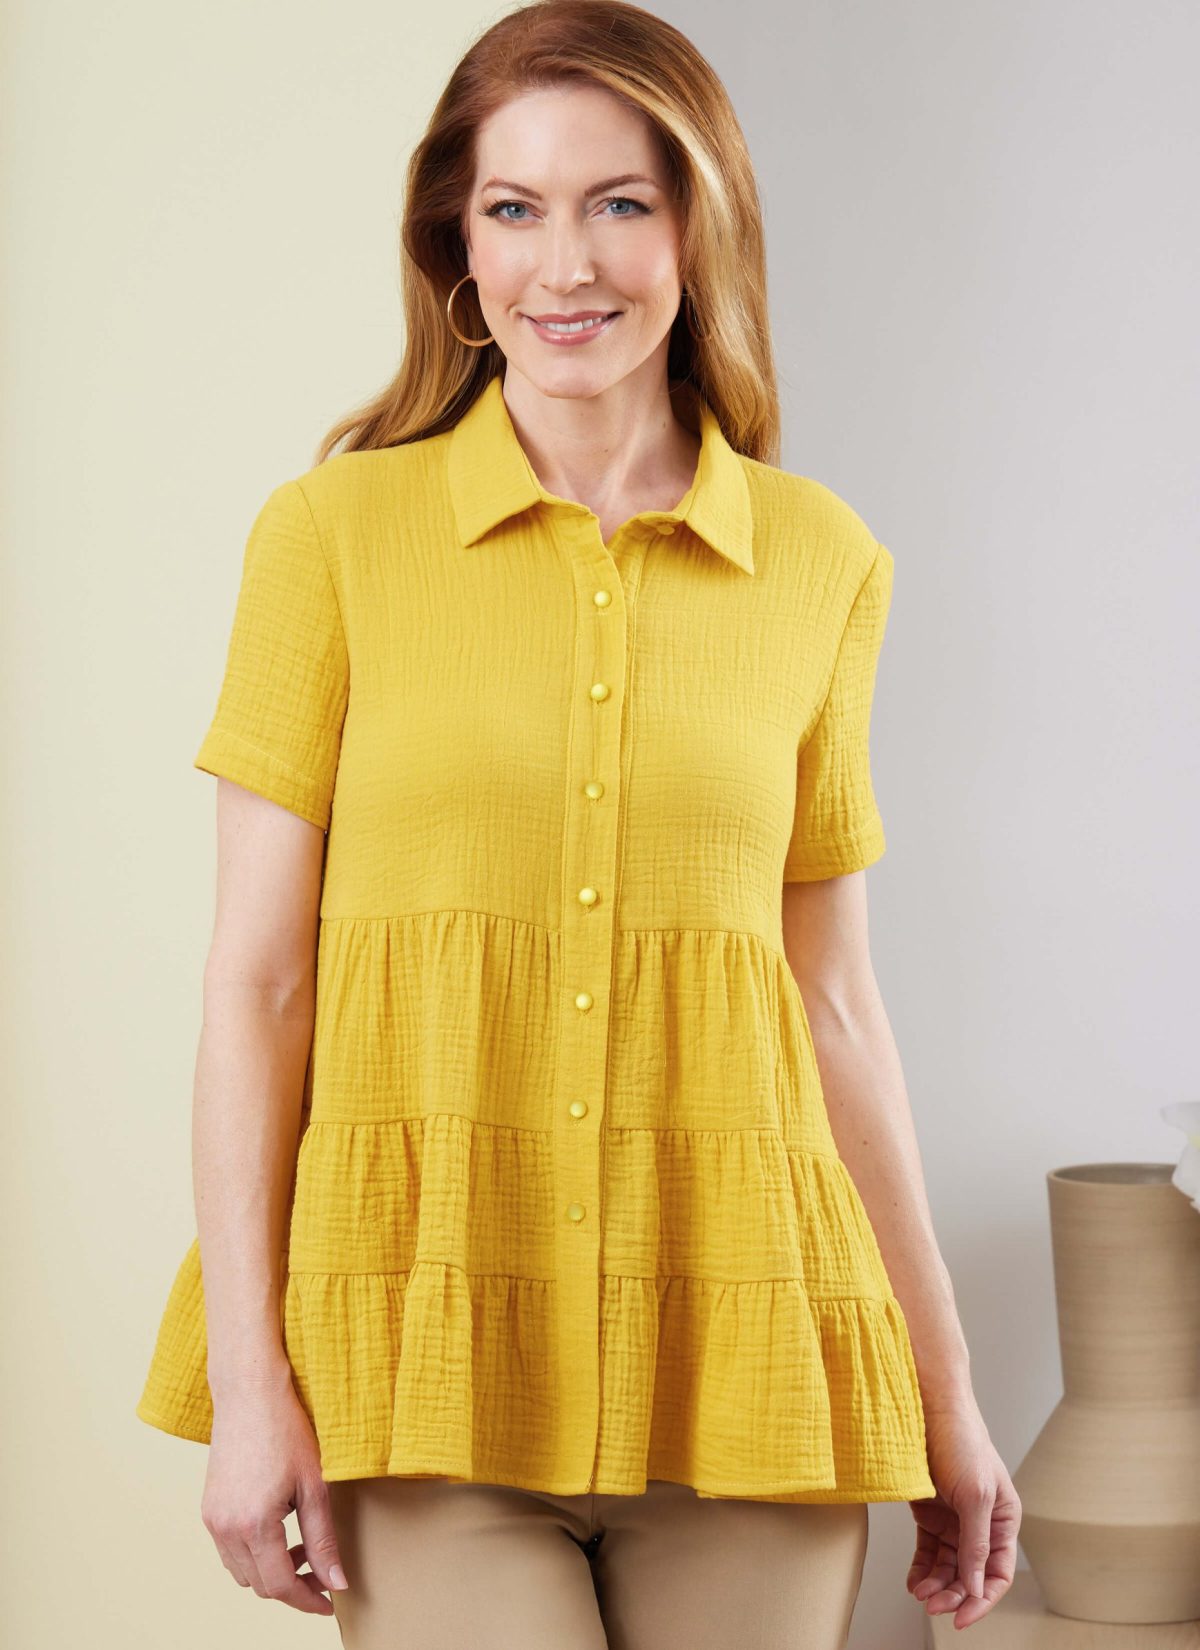 Butterick Sewing Pattern B6897 Misses' Top